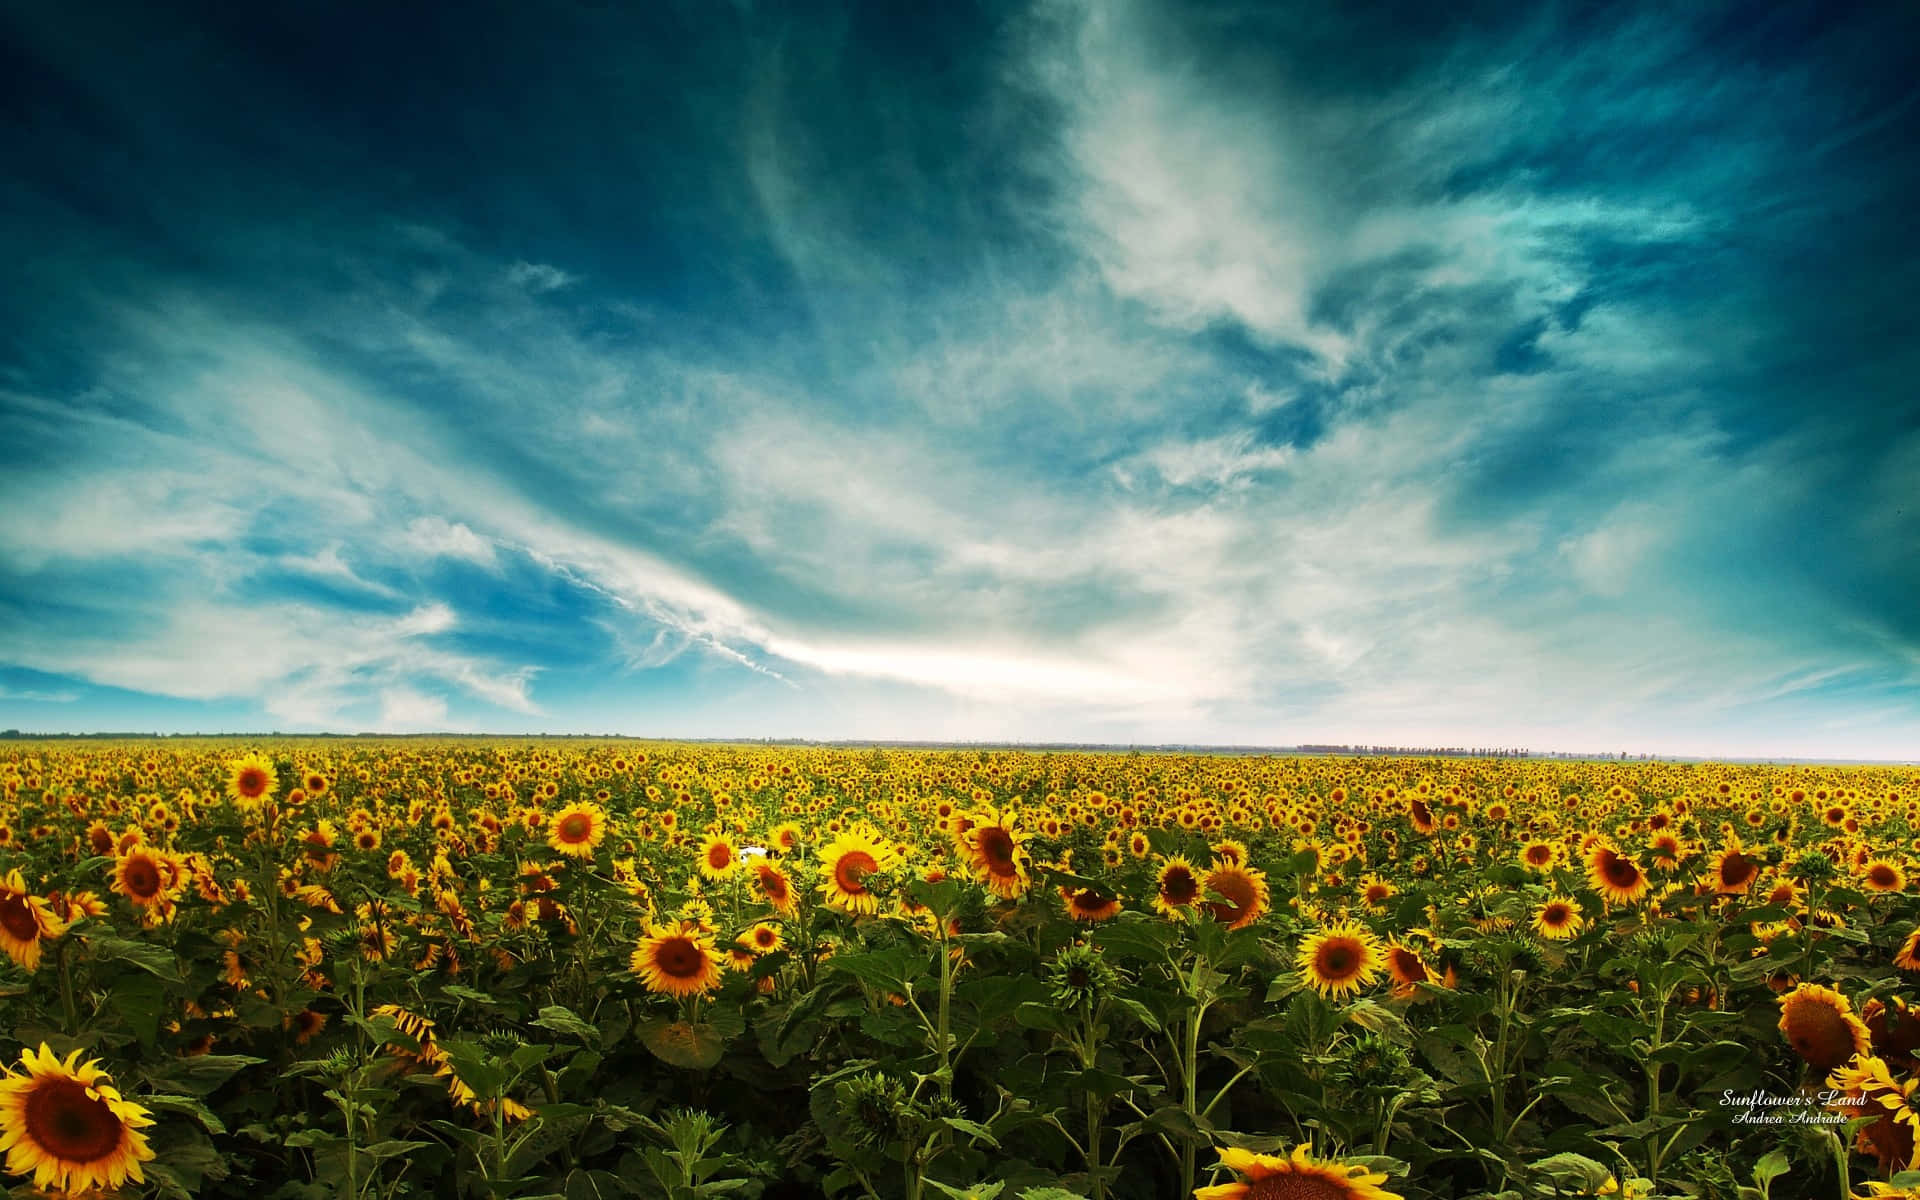 "A bright, yellow sunflower on a sunny day." Wallpaper